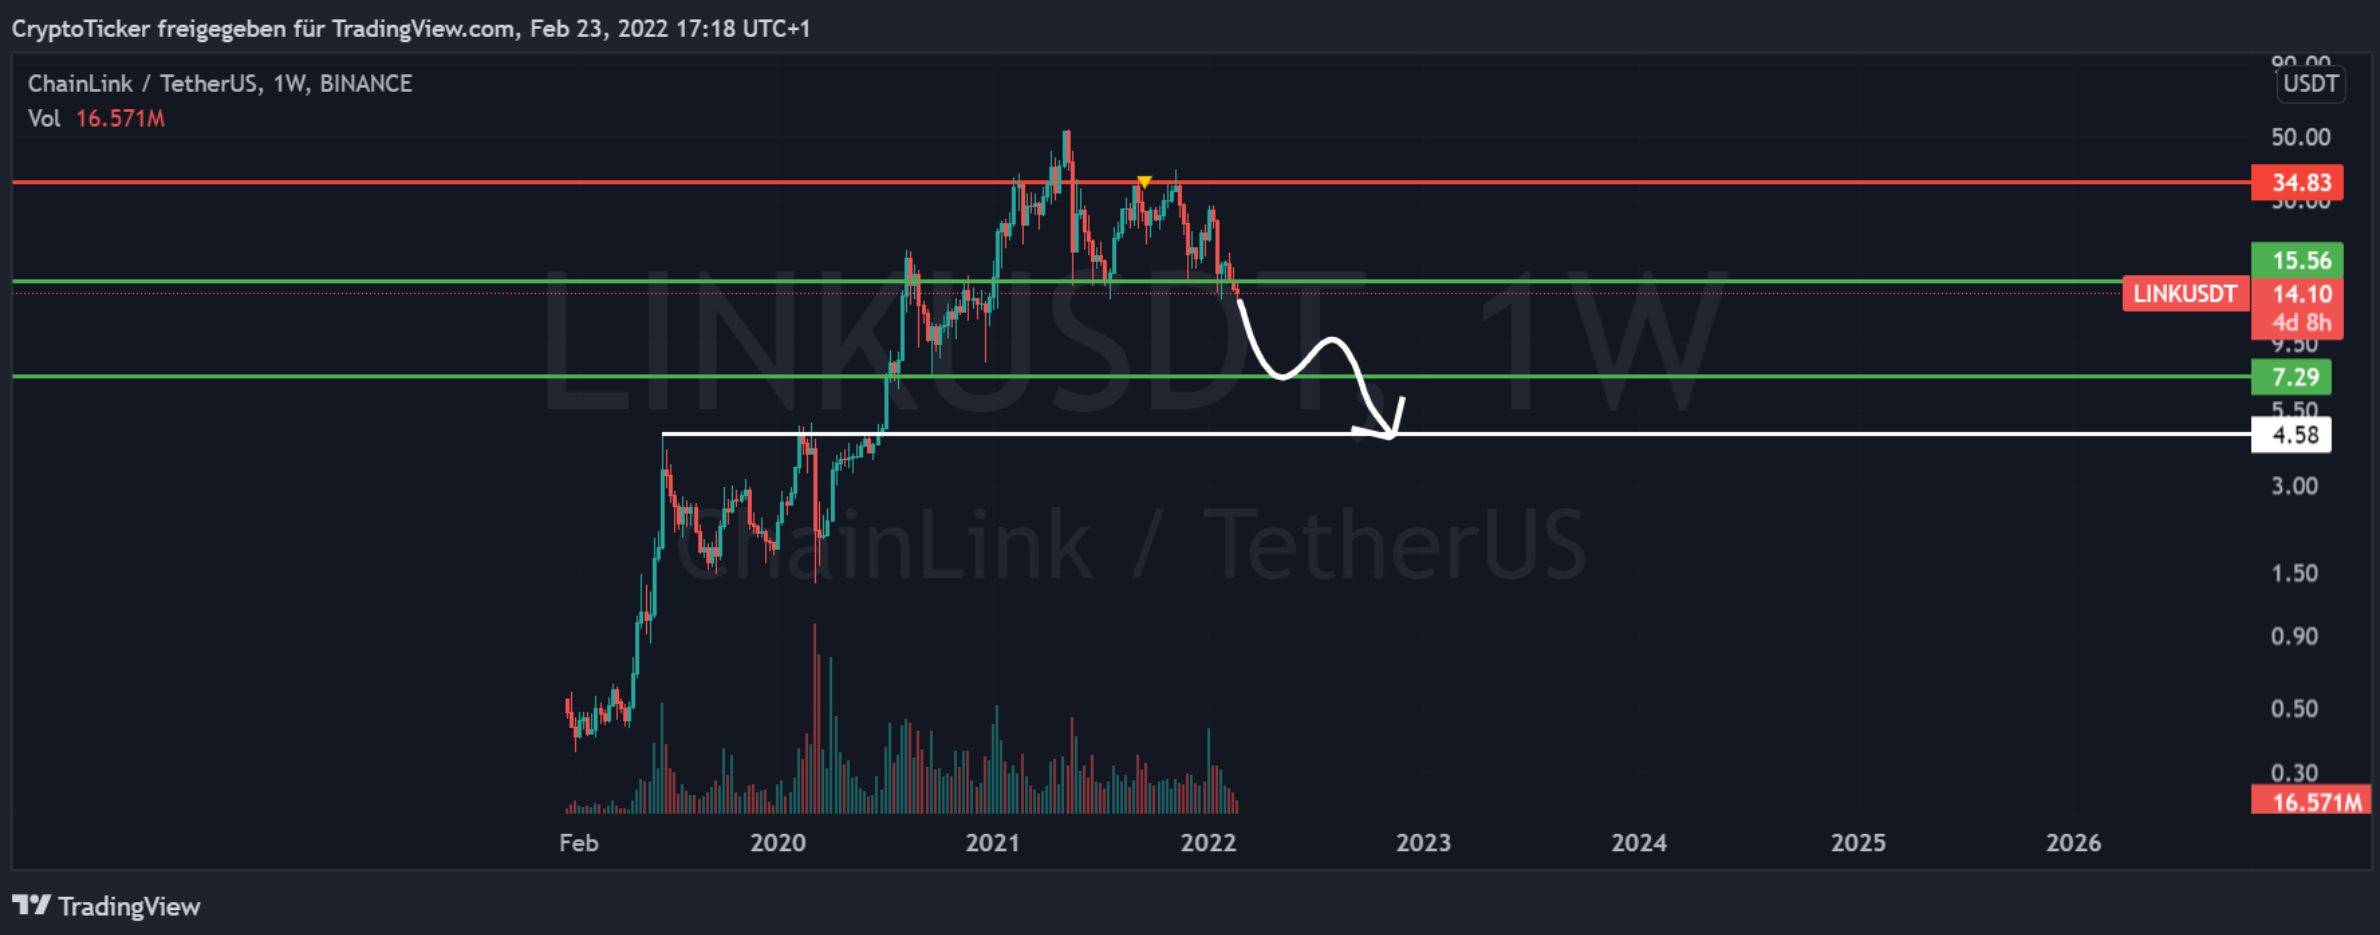 LINK/USDT 1-week chart showing the further potential low of LINK price